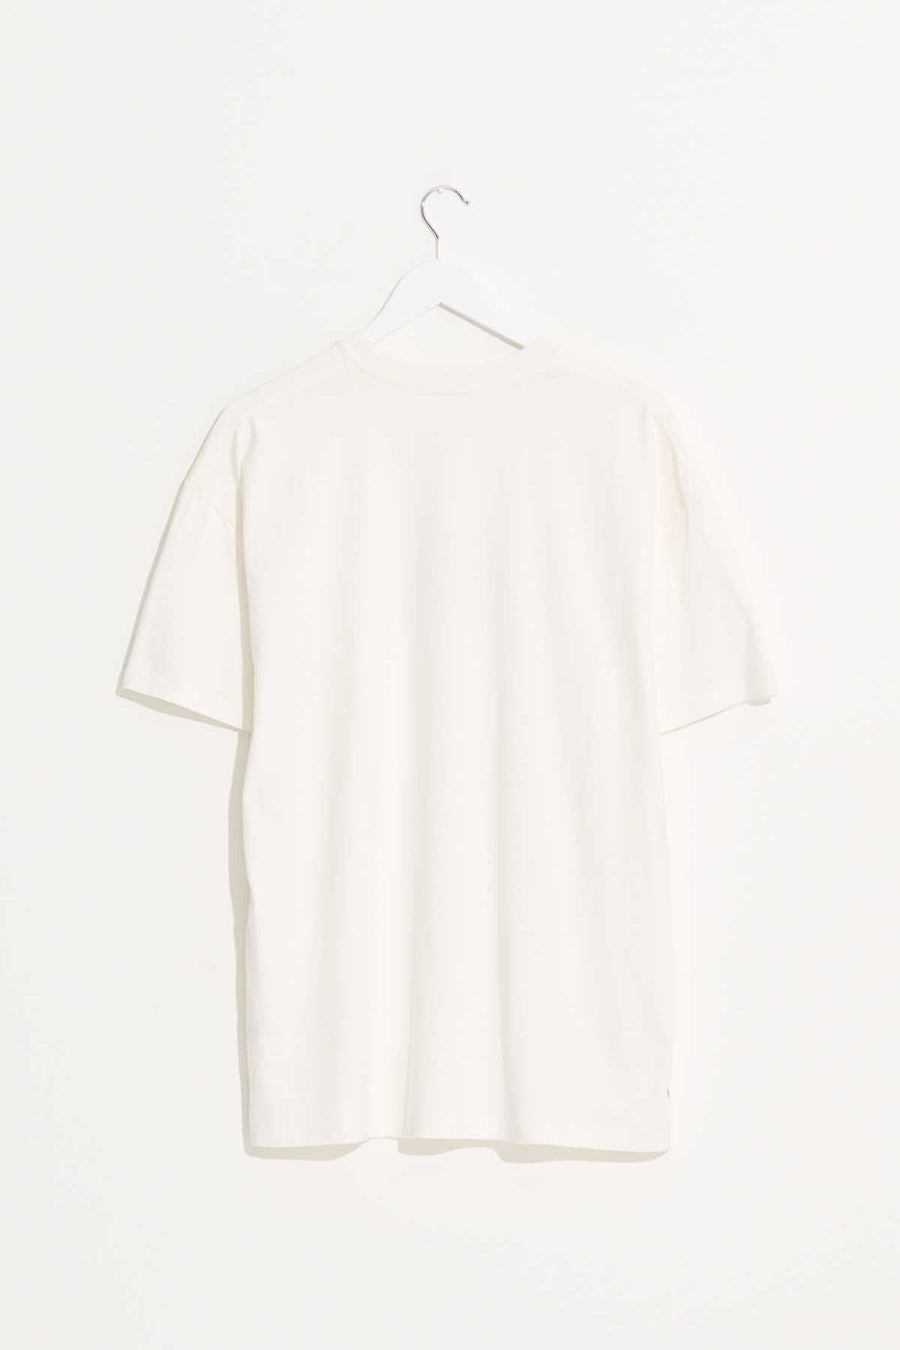 MISFIT SHEER LUCK SS TEE - PIGMENT THRIFT WHITE - WILDROSE